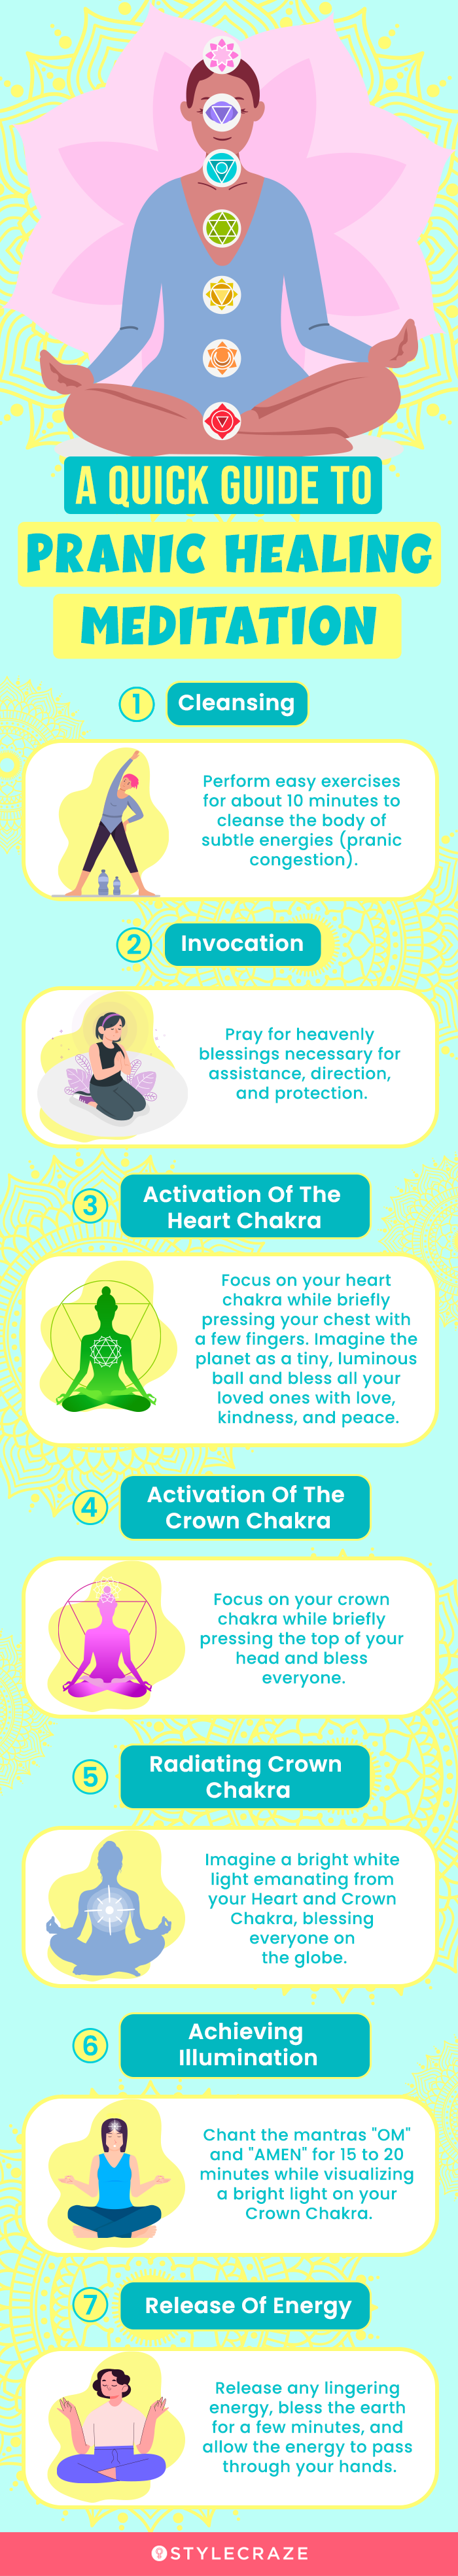 a quick guide to pranic healing meditation (infographic)